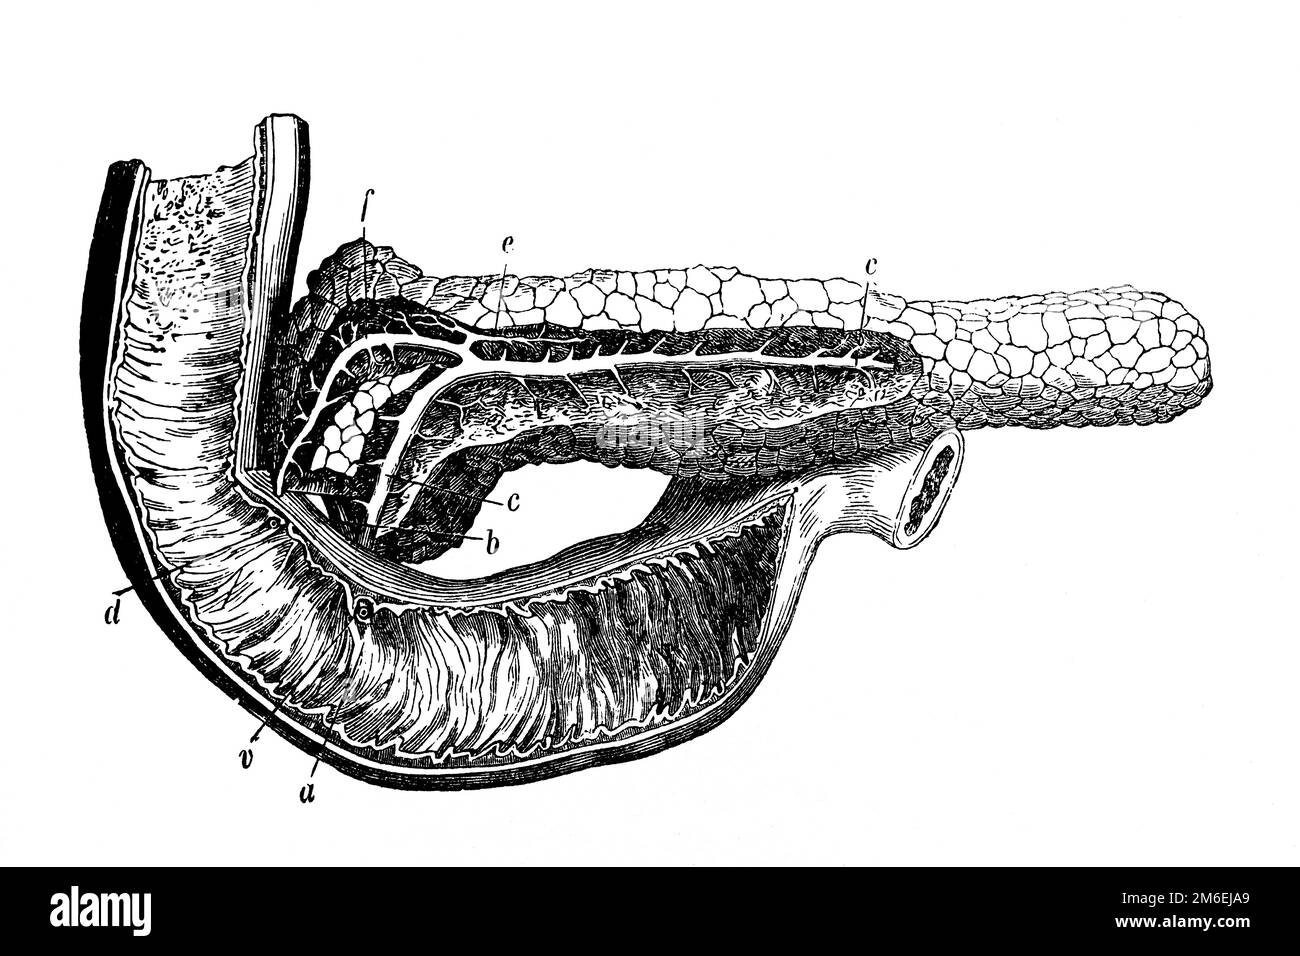 Pancreas. Antique illustration from a medical book. 1889. Stock Photo